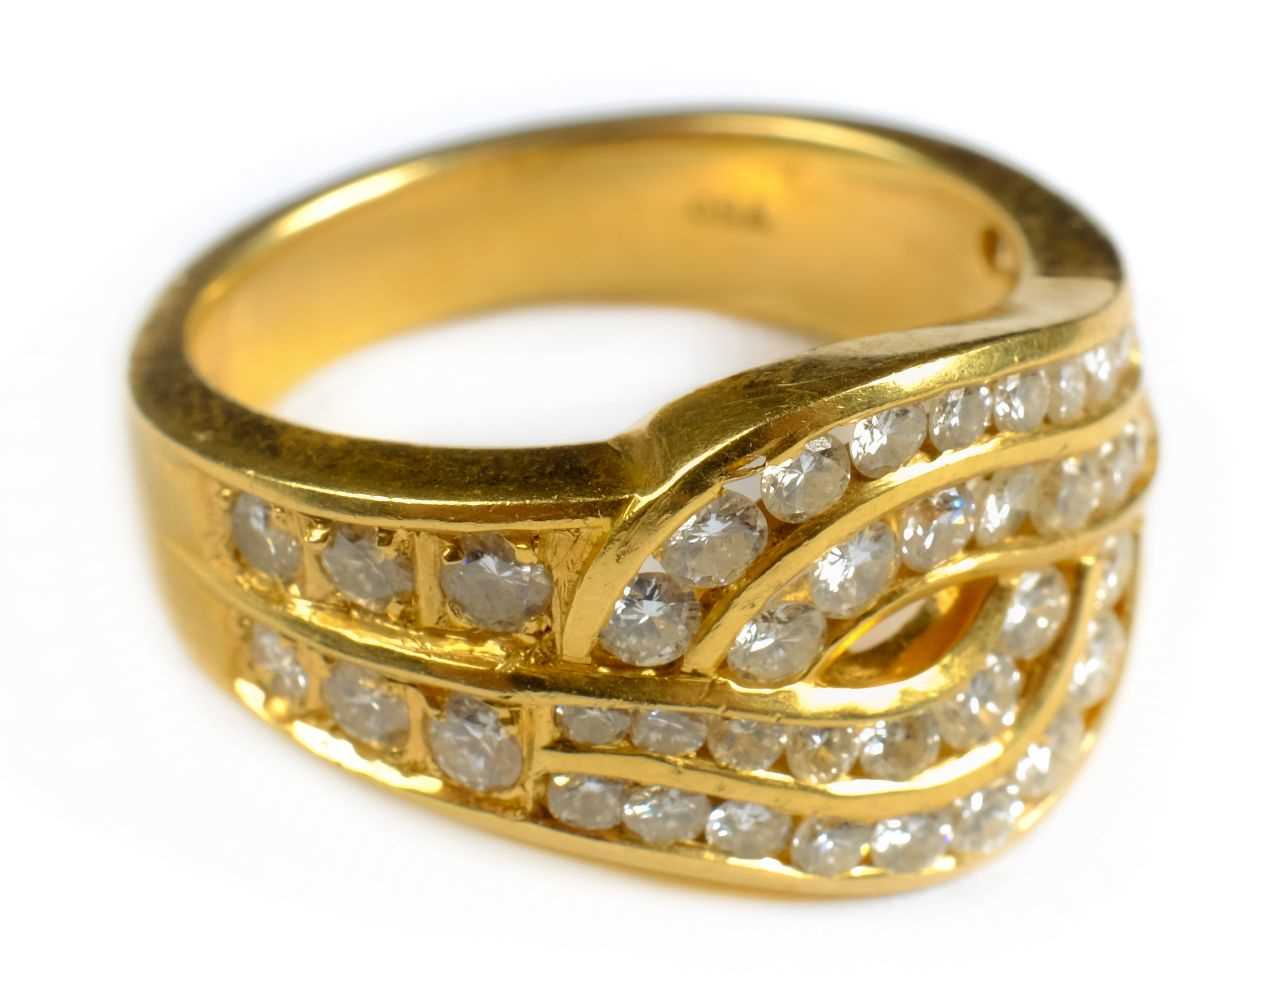 Lot 22 - Ring. An 18ct gold ring